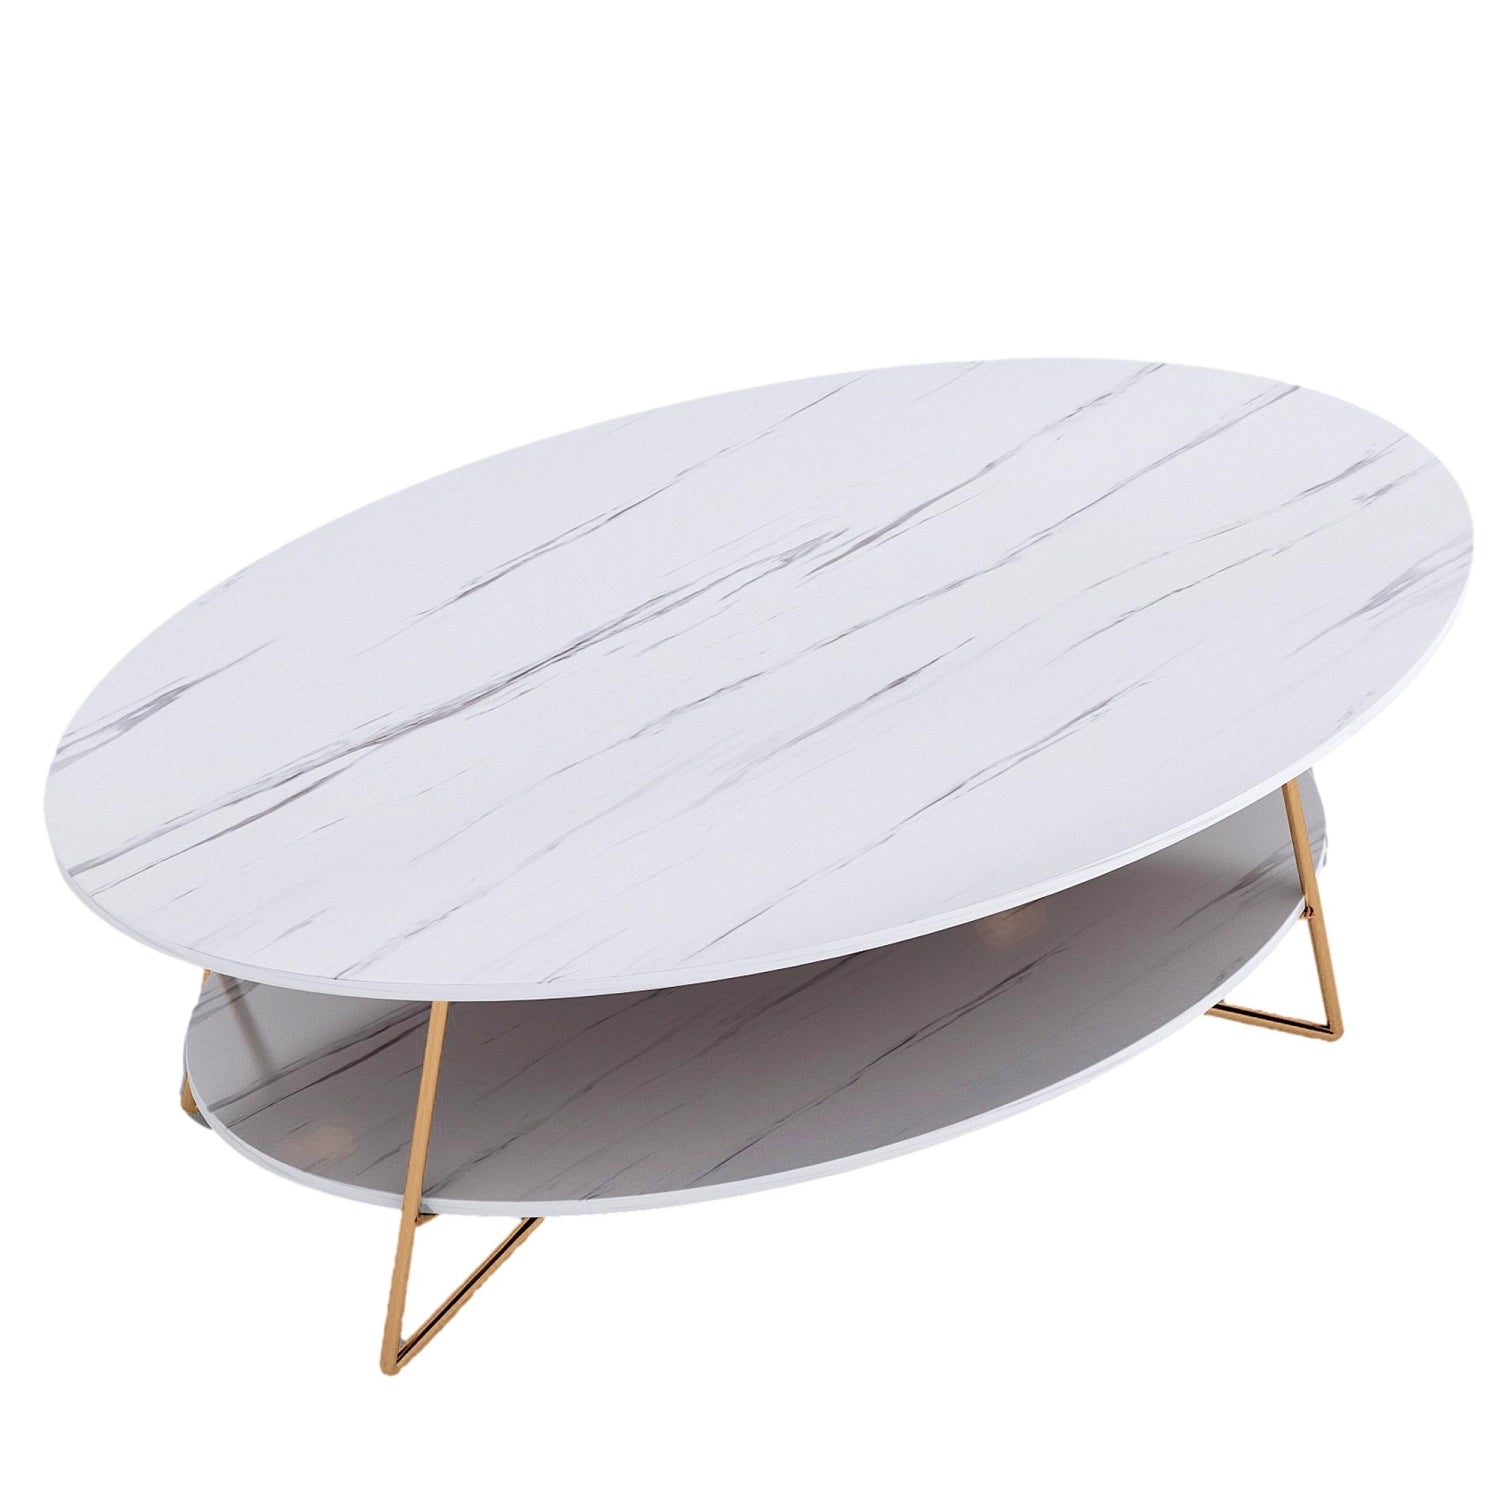 ViscoLogic WALKER Mid-Century Coffee Table For Living Room (White)